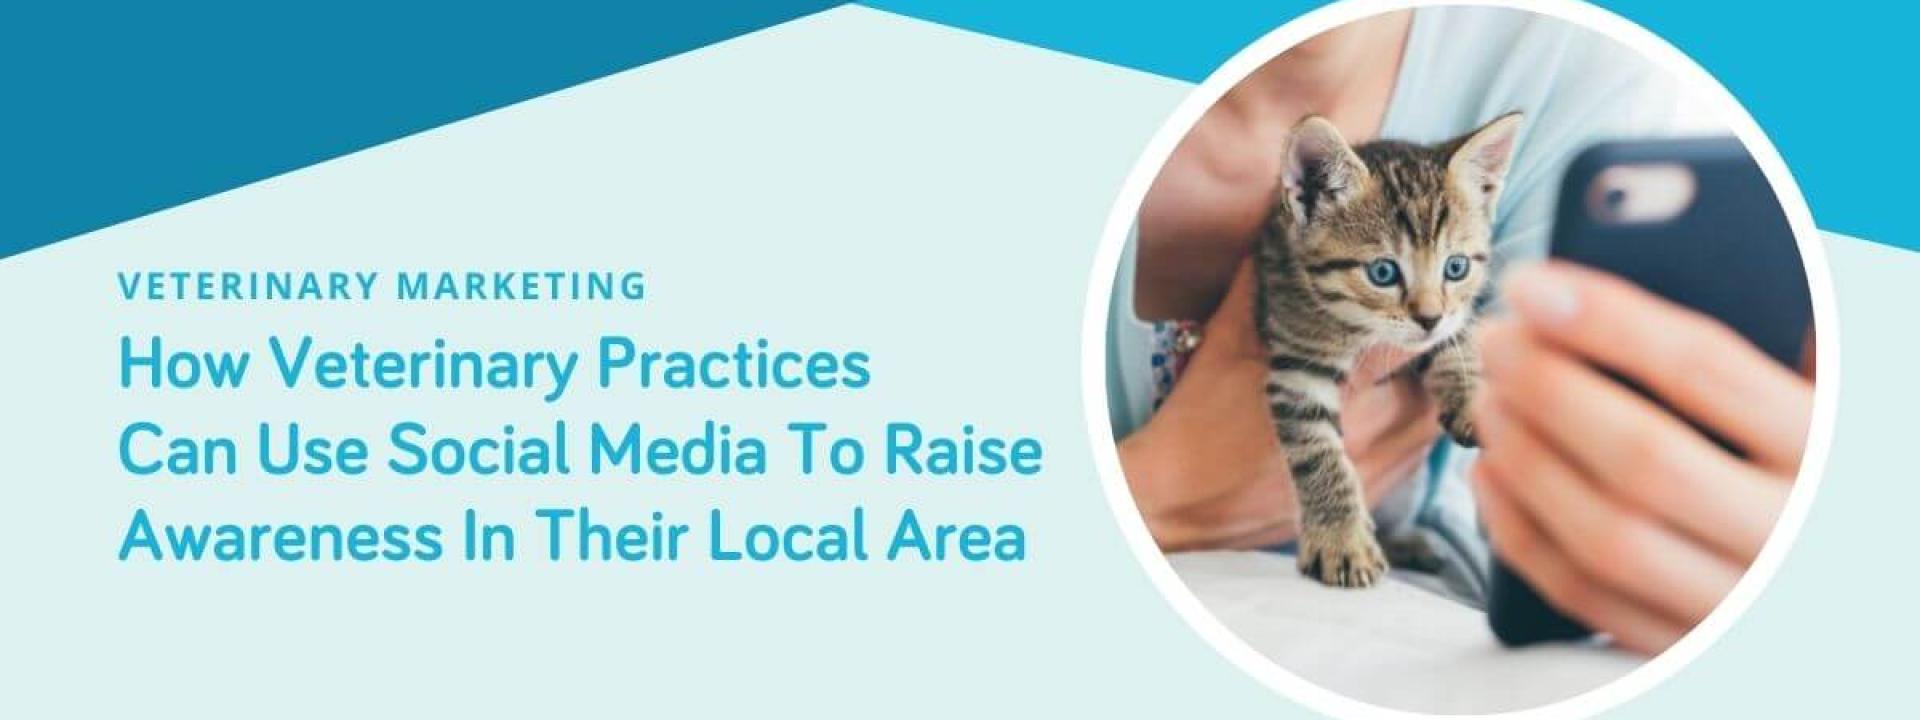 How Veterinary Practices Can Use Social Media To Raise Awareness In Their Local Area